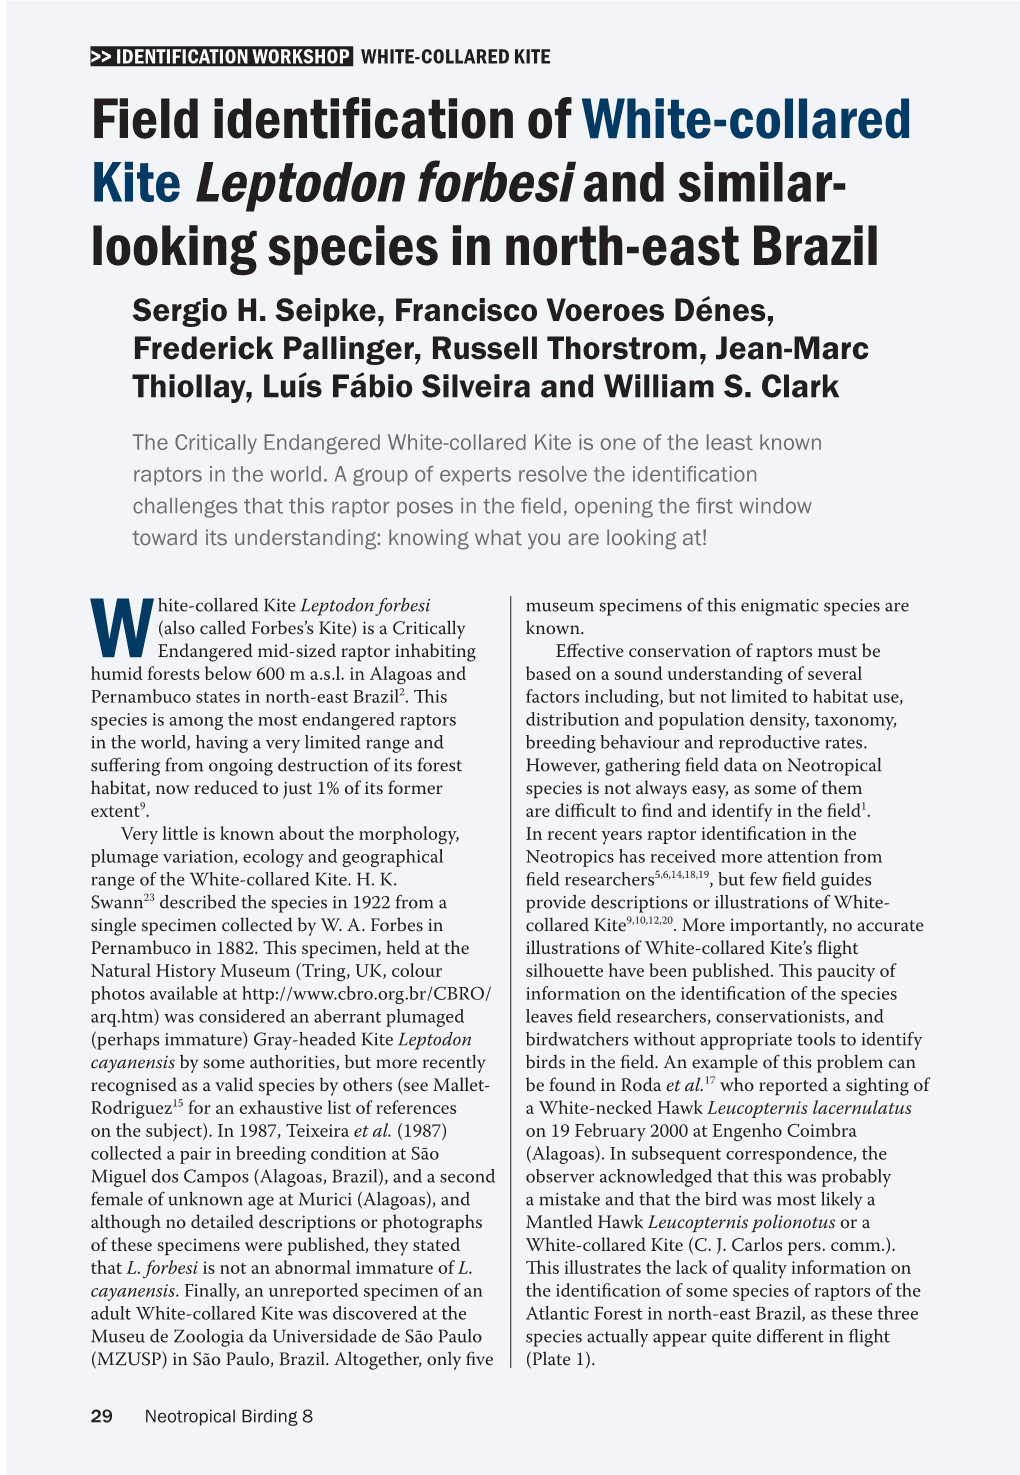 Leptodon Forbesi and Similar- Looking Species in North-East Brazil Sergio H